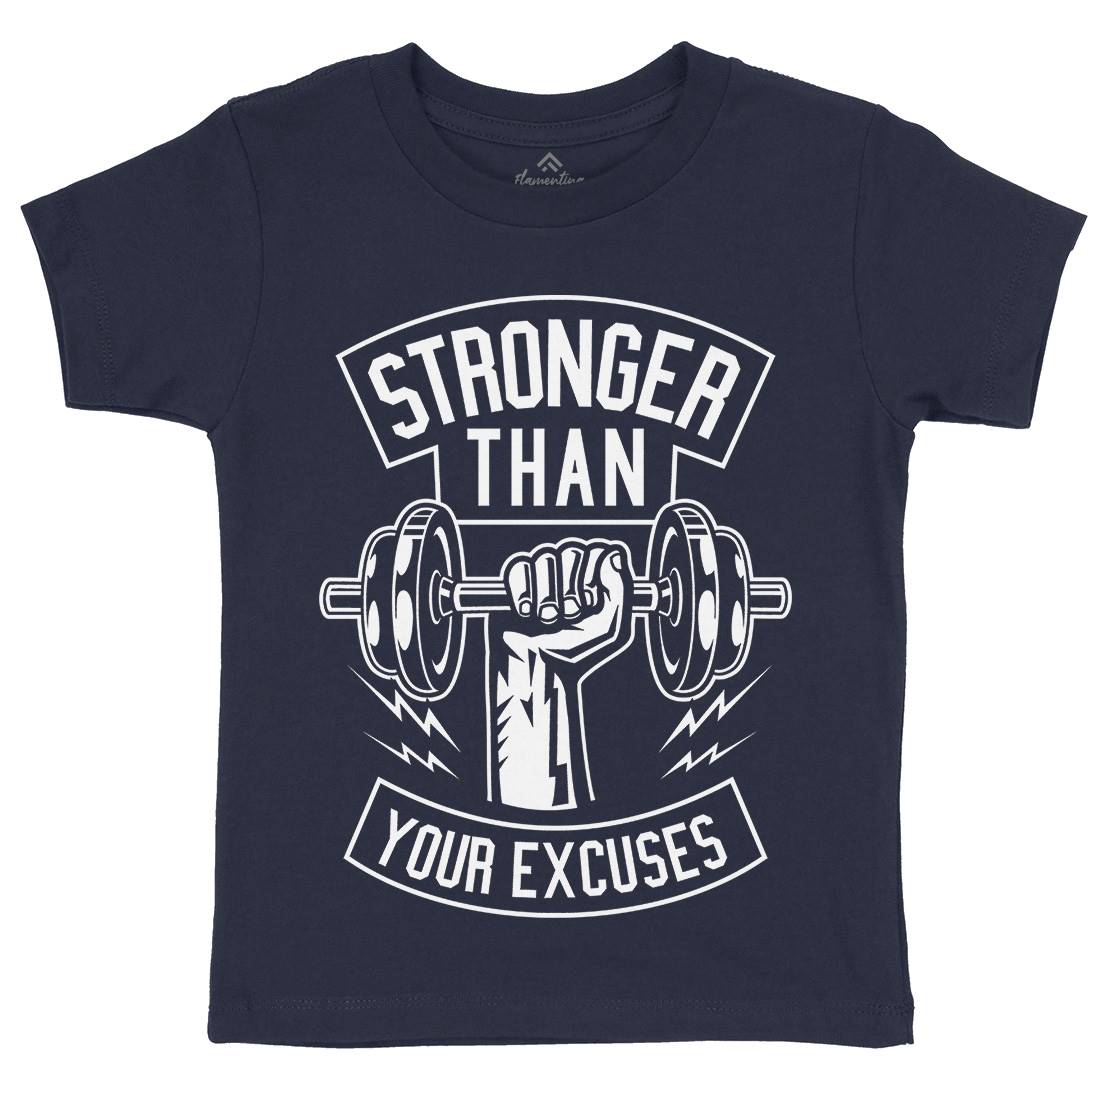 Stronger Than Your Excuses Kids Crew Neck T-Shirt Gym B644